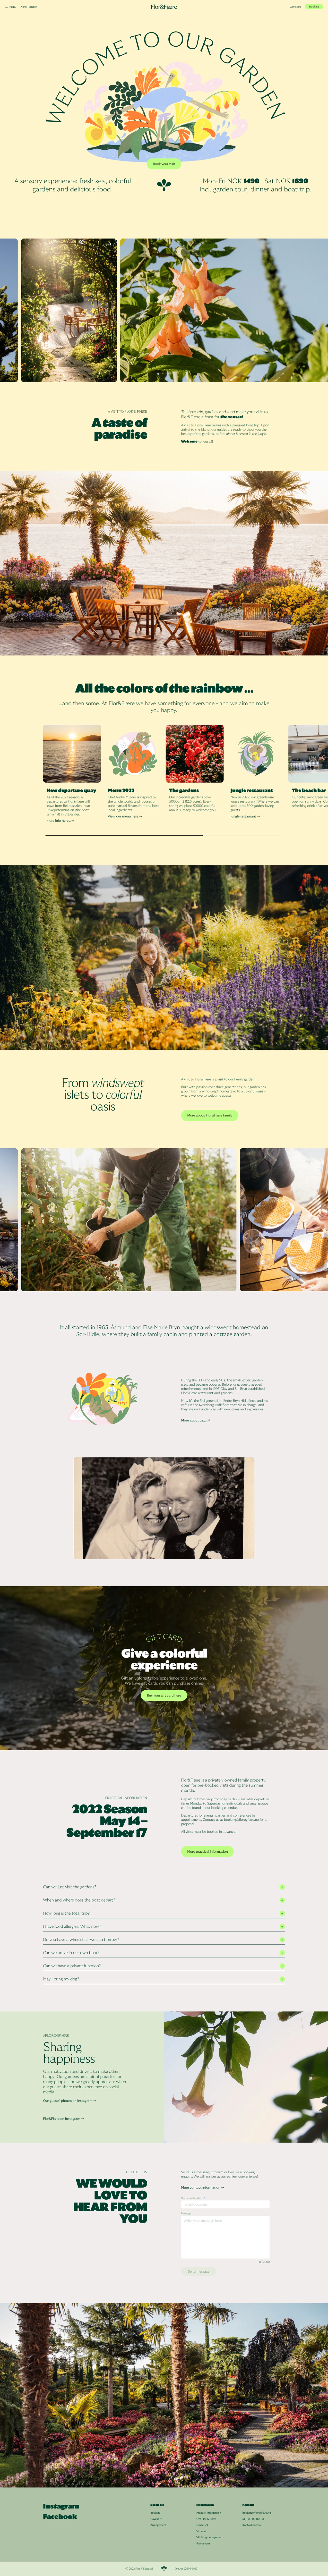 Flor & Fjære Landing Page Example: A sensory experience; fresh sea, colorful gardens and delicious food.